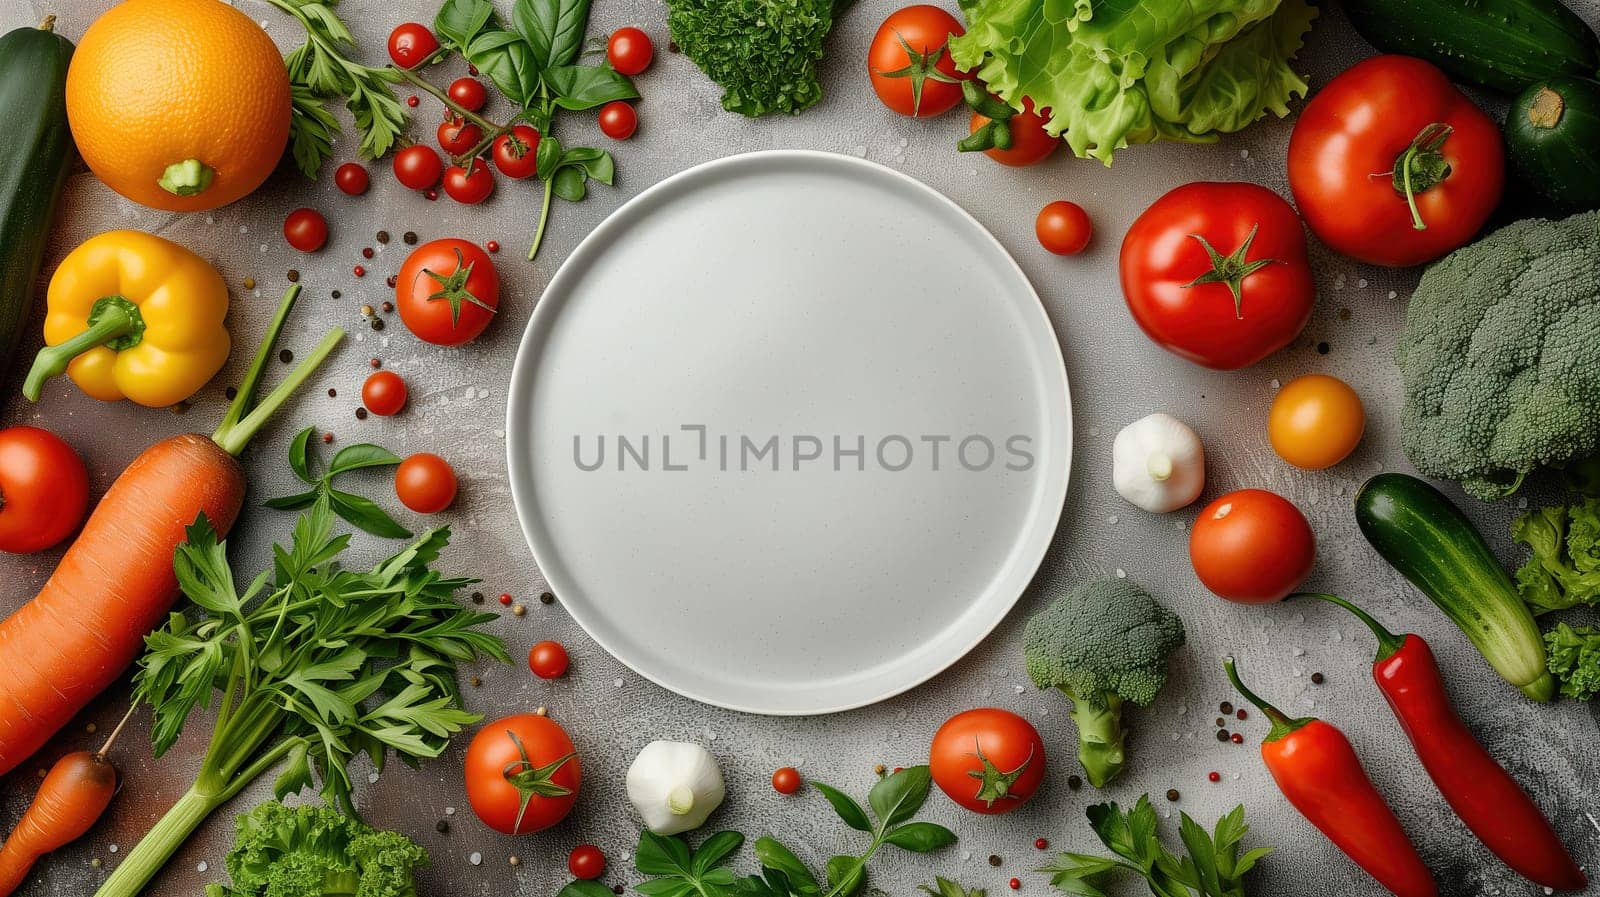 On a wooden table, there is an assortment of fresh vegetables such as tomatoes, cucumbers, bell peppers, carrots, lettuce, onions, and more. The vegetables are neatly organized and ready for use in cooking or salads.